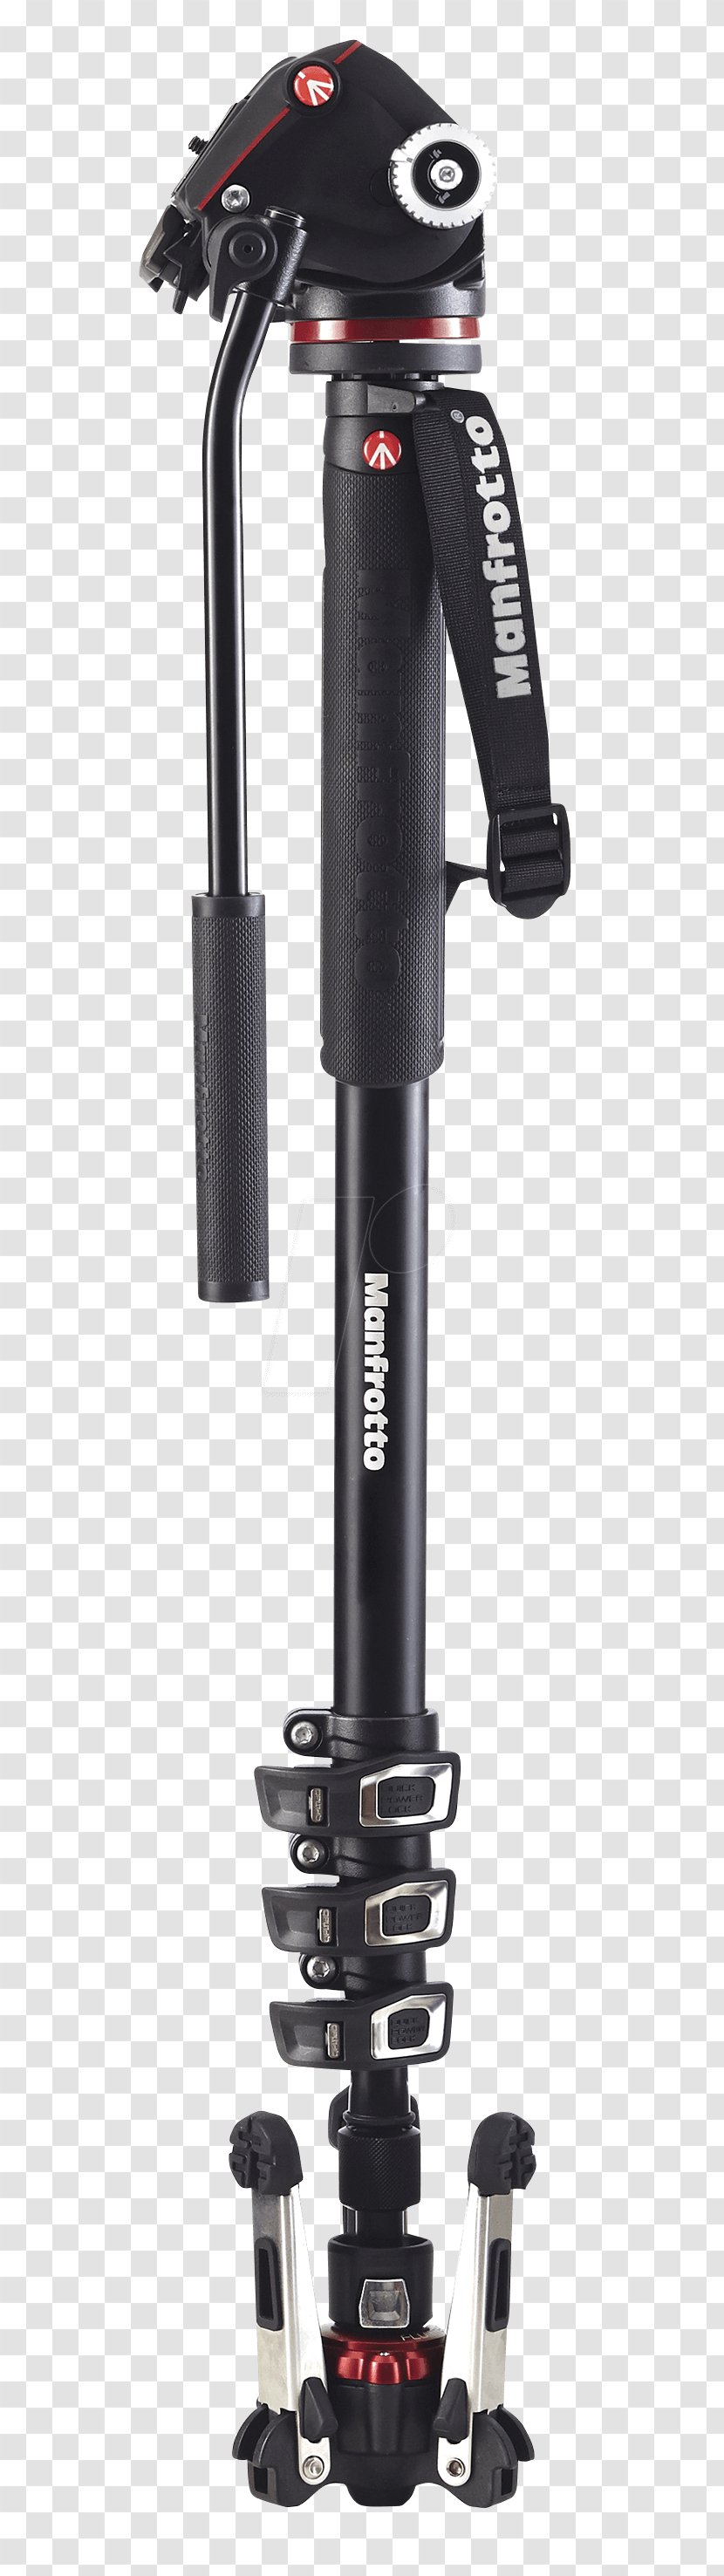 Monopod Manfrotto Tripod Photography Benro - Camera Accessory Transparent PNG